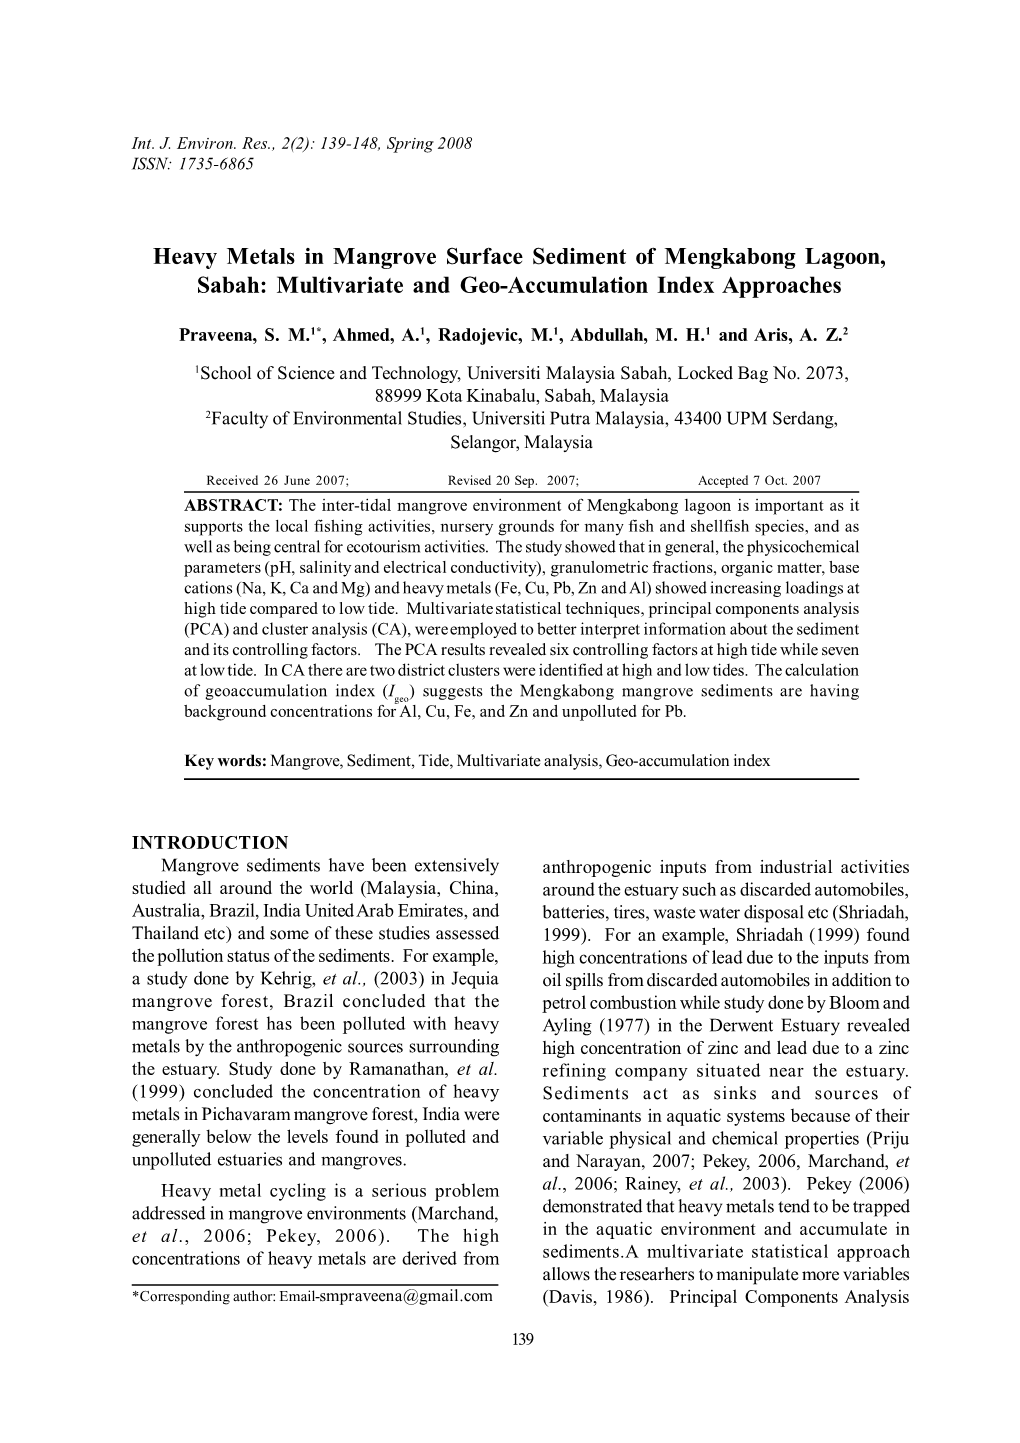 Heavy Metals in Mangrove Surface Sediment of Mengkabong Lagoon, Sabah: Multivariate and Geo-Accumulation Index Approaches